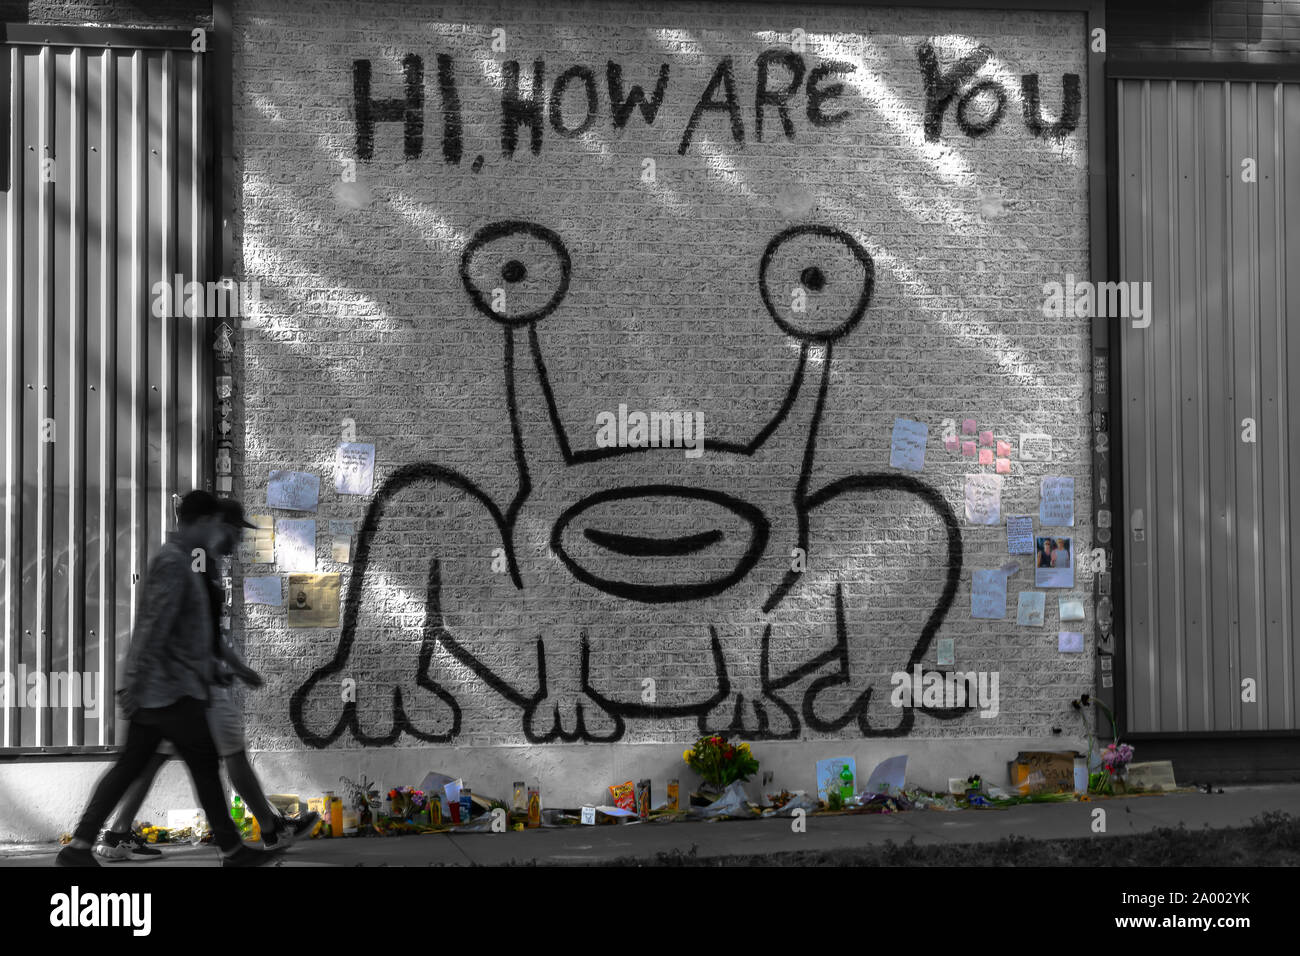 A makeshift memorial is formed under the iconic 'Hi How Are You' mural in Austin to celebrate the life of artist Daniel Johnston, who passed 9/11/19. Stock Photo